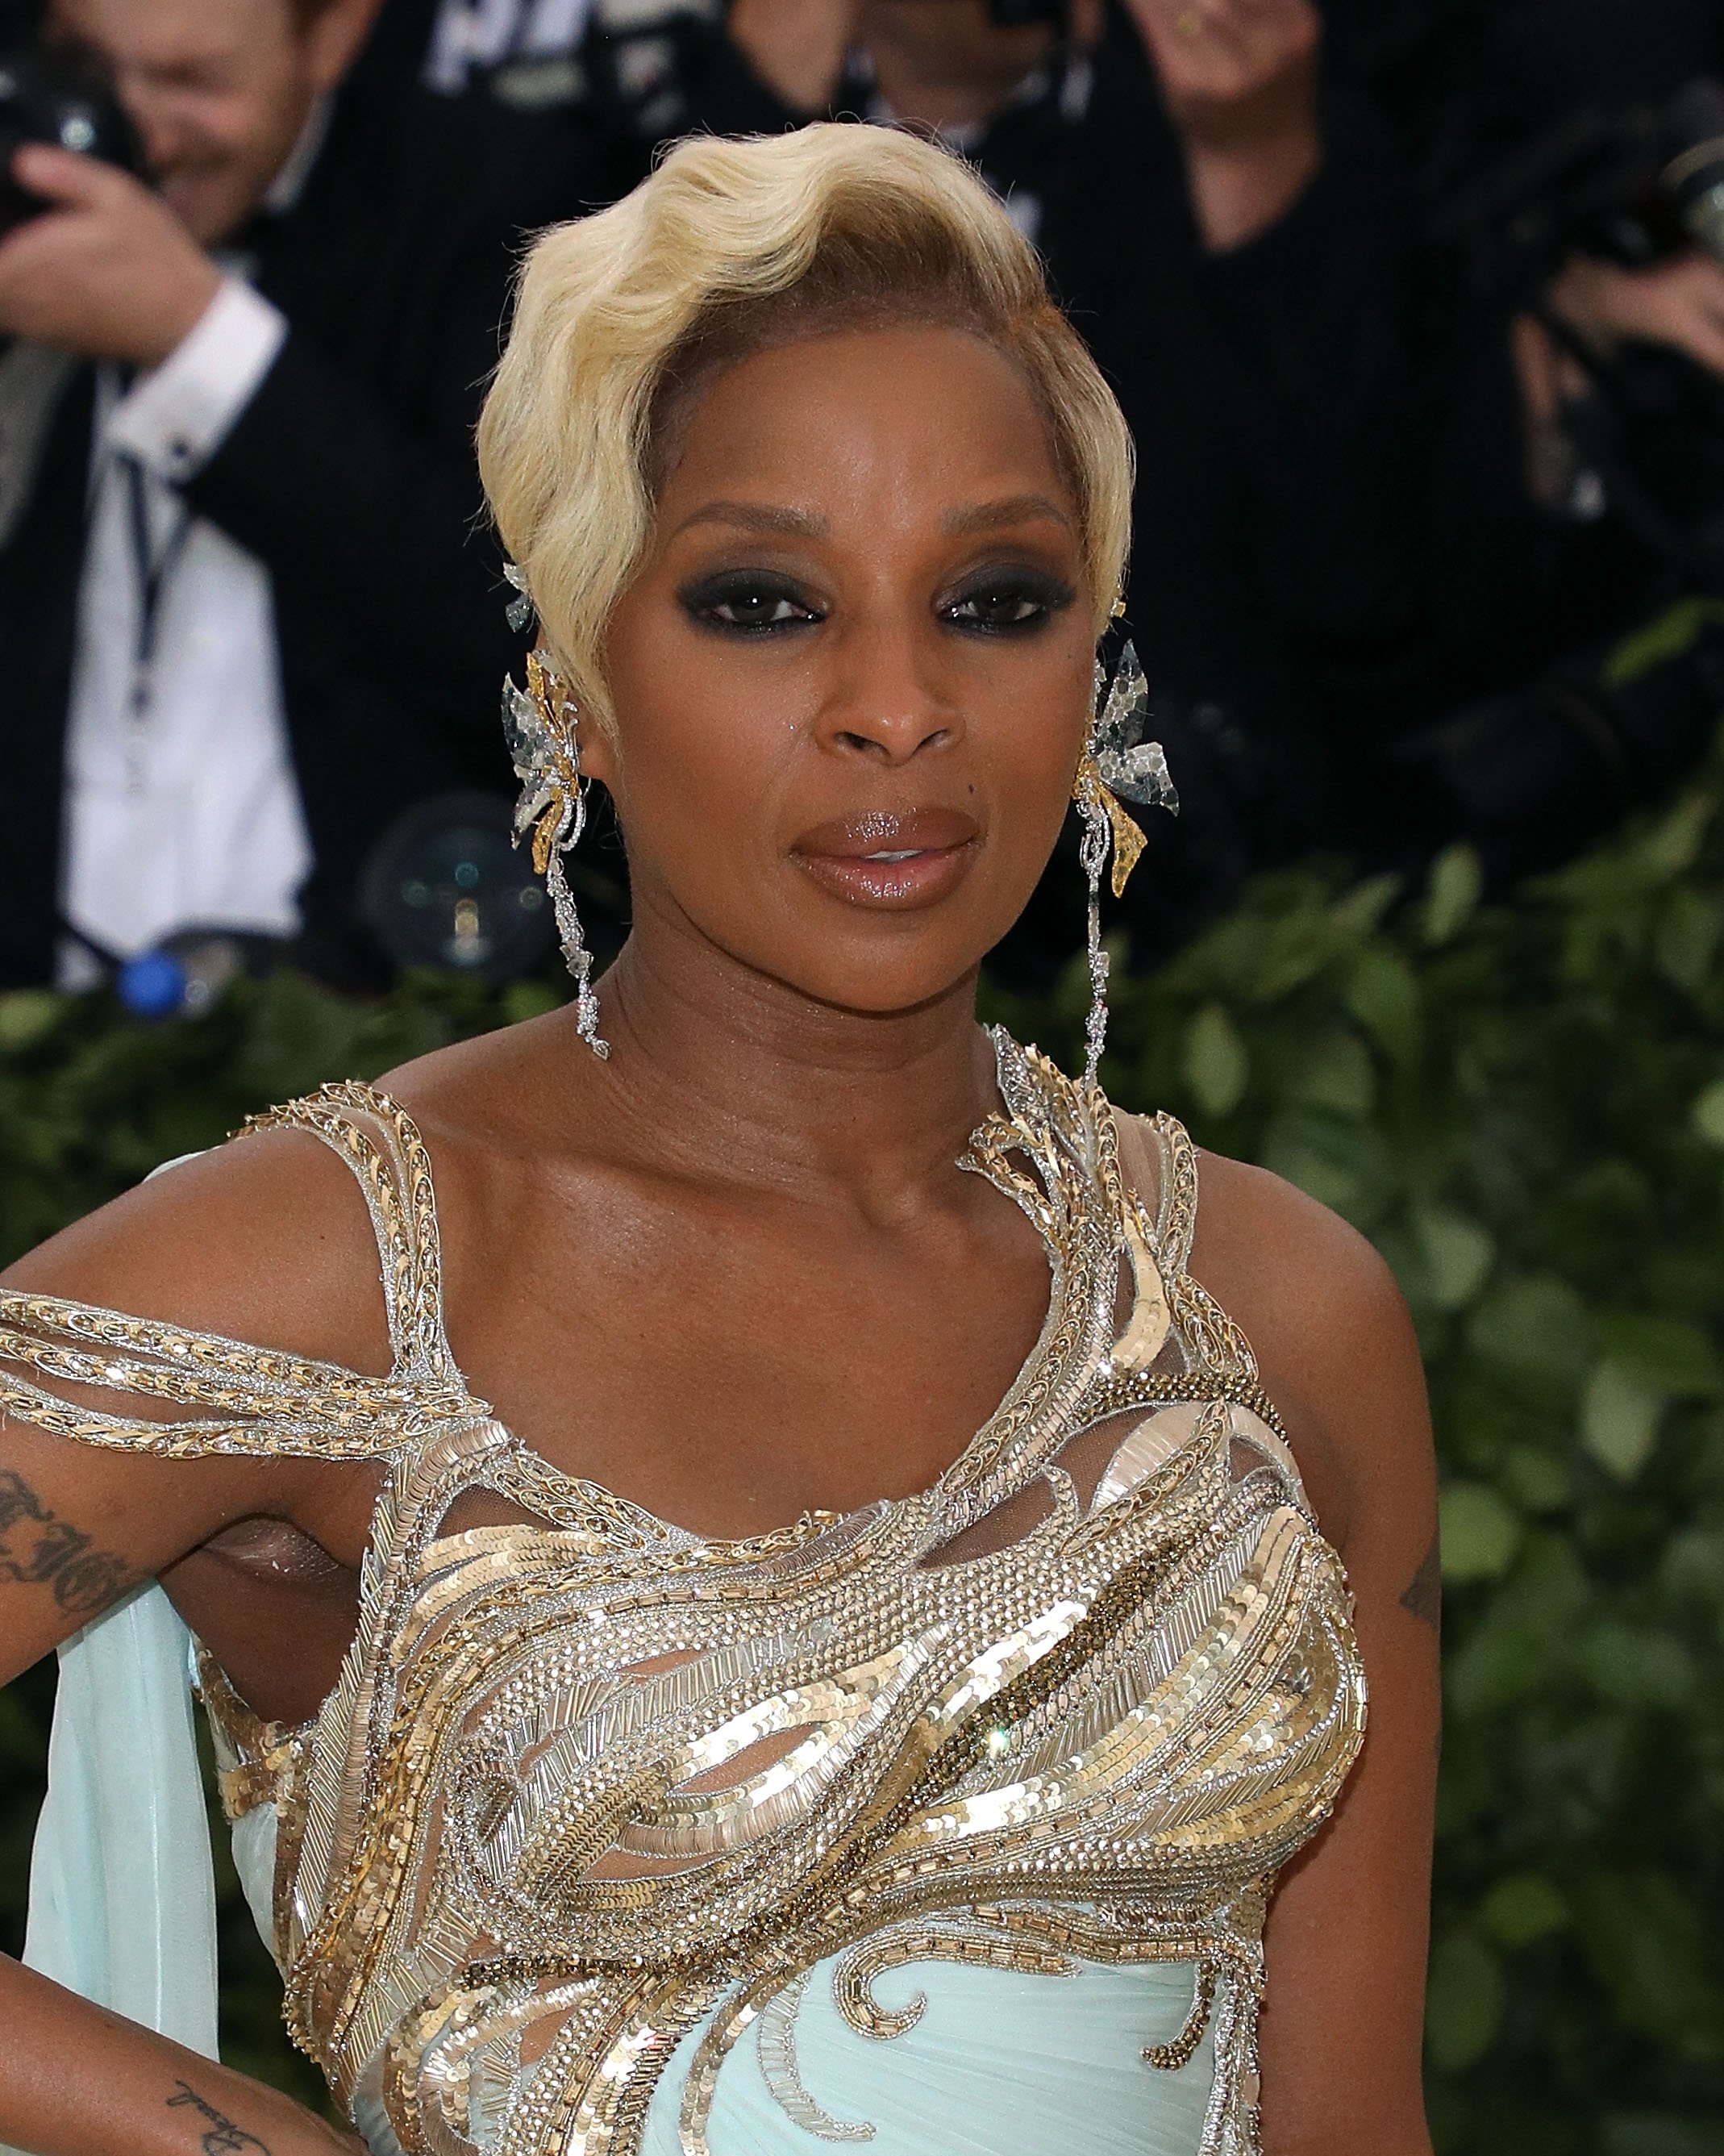 Mary J. Blige at the 2018 Costume Institute Benefit at Metropolitan Museum of Art on May 7, 2018 in New York City. | Source: Getty Images